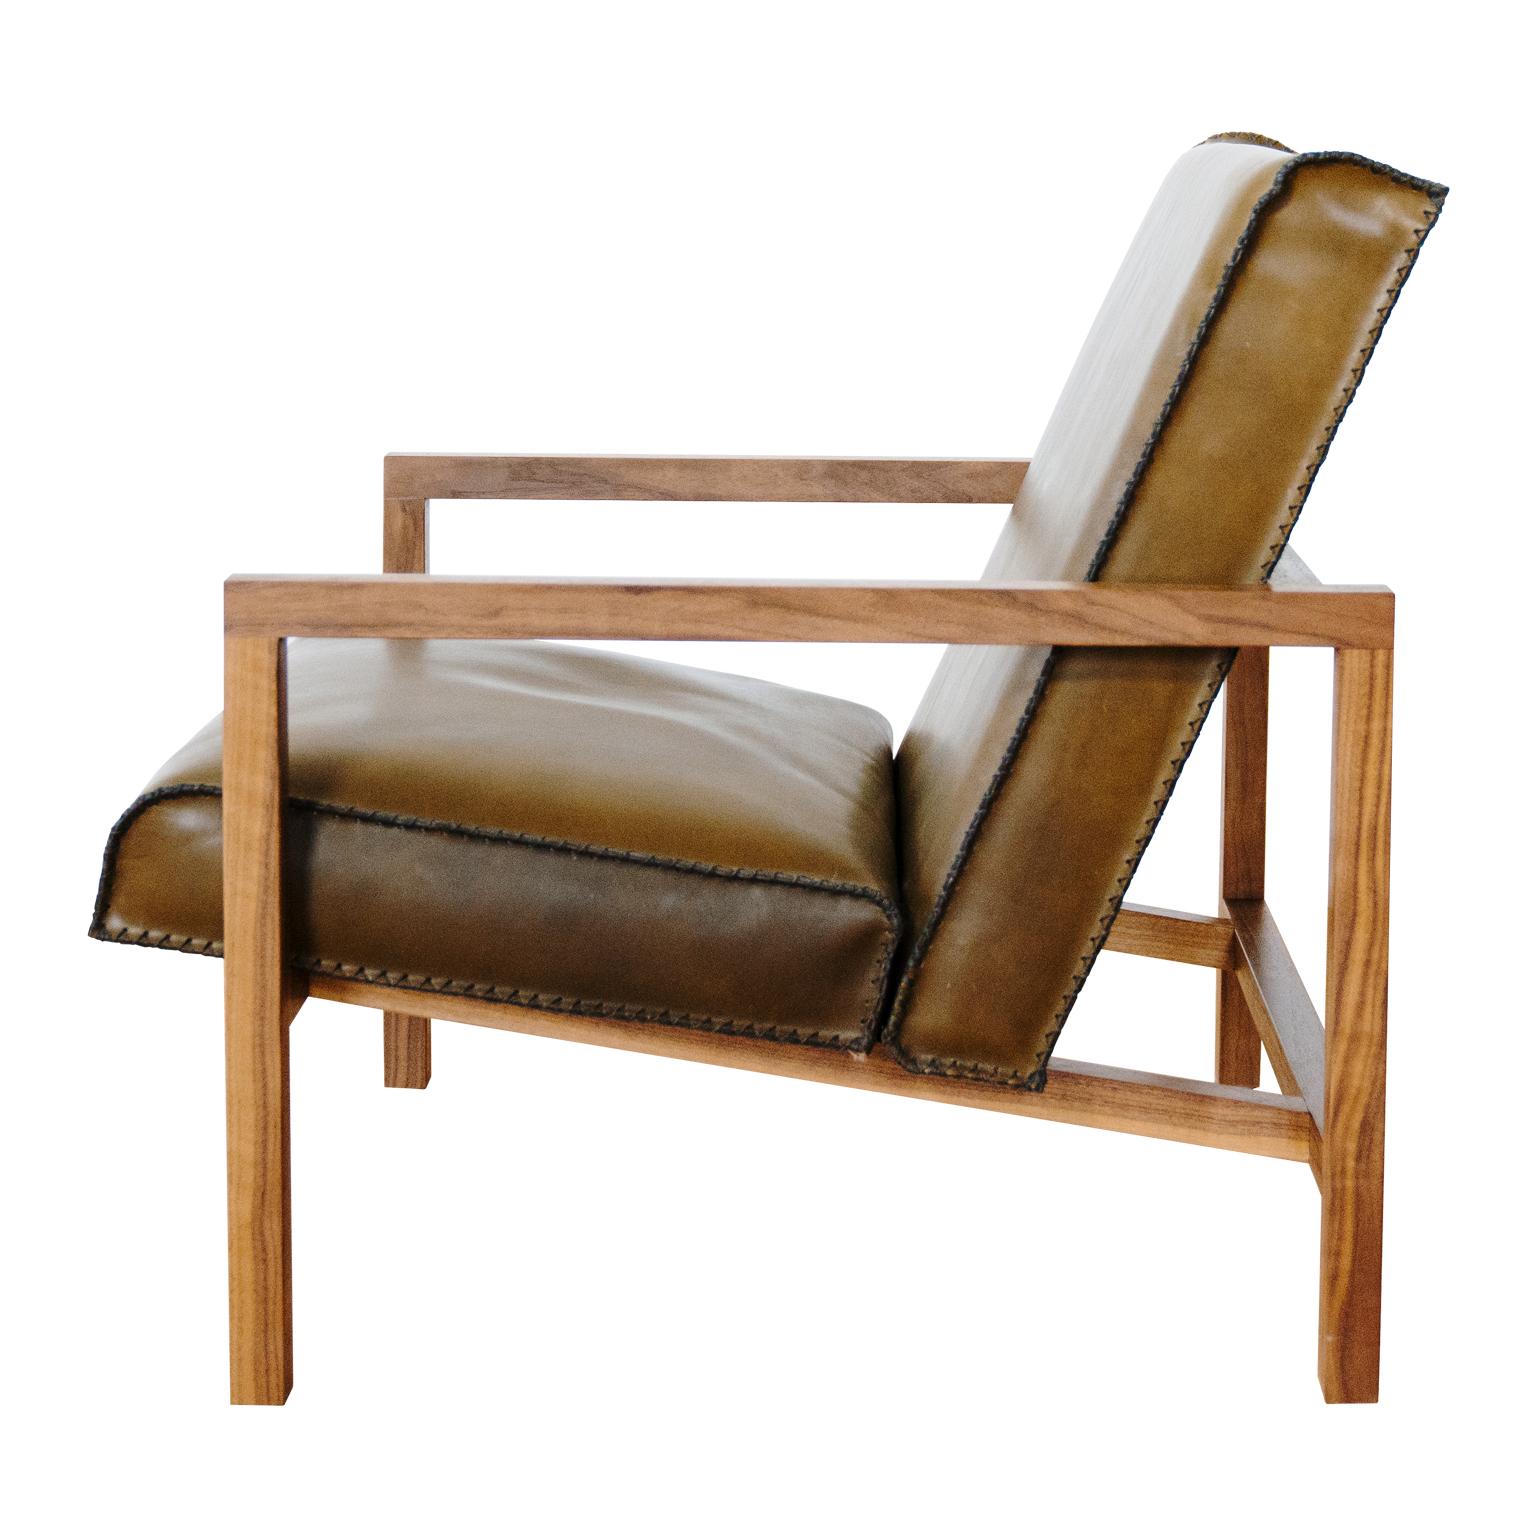 The Vincent lounge chair features a heritage leather seat and back and finely crafted black walnut wooden frame. 
Displayed here in olive green leather, the Vincent is a true statement piece, sure to be noticed and make a Stand out impression in